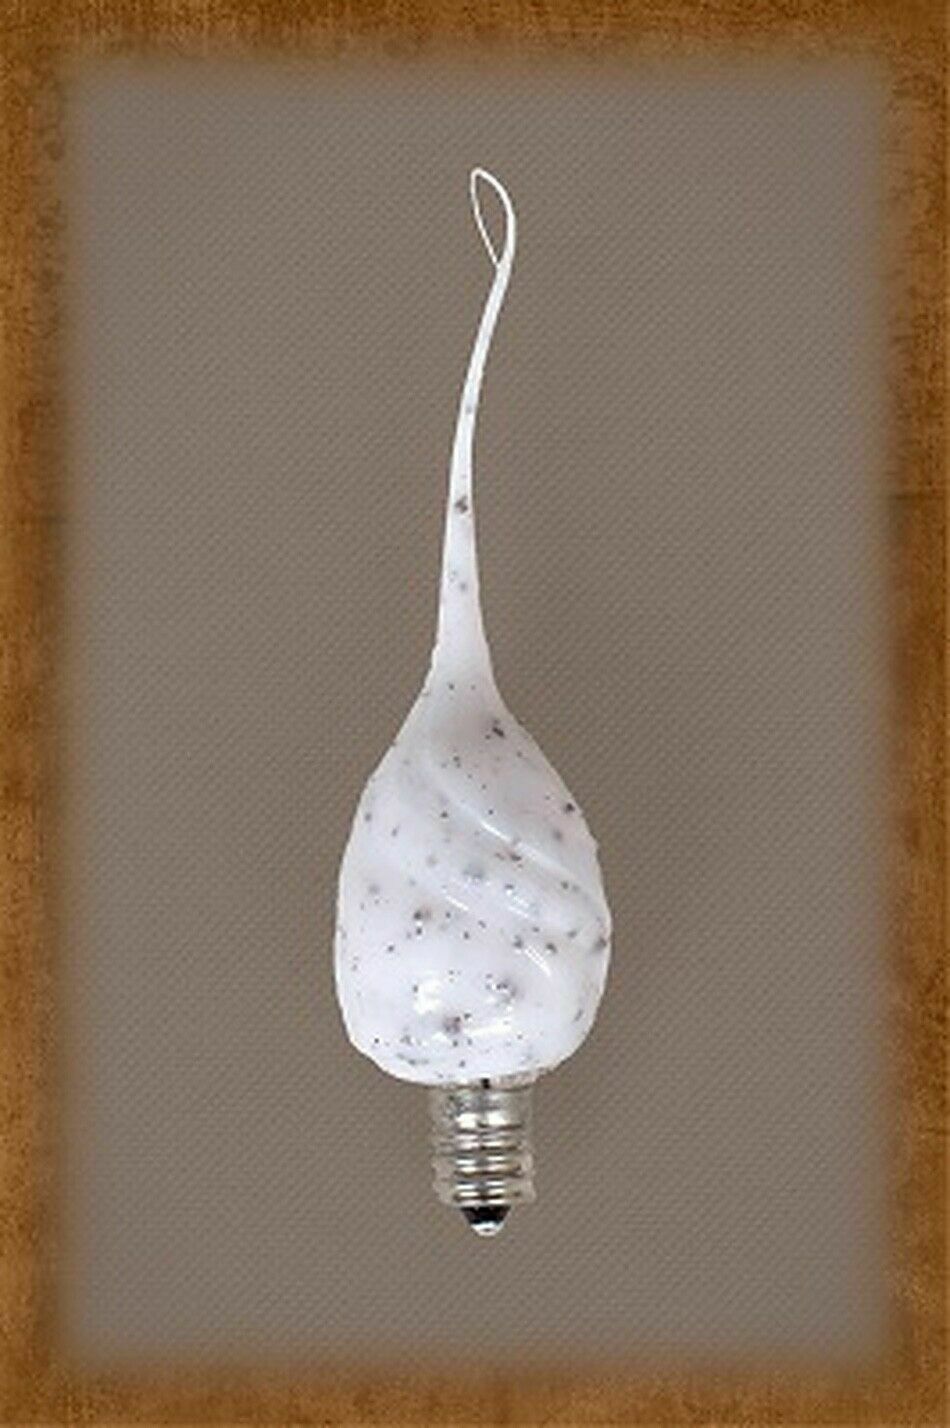 Primitive Country Handmade Cookies and Cream Silicone dipped Bulb - The Primitive Pineapple Collection